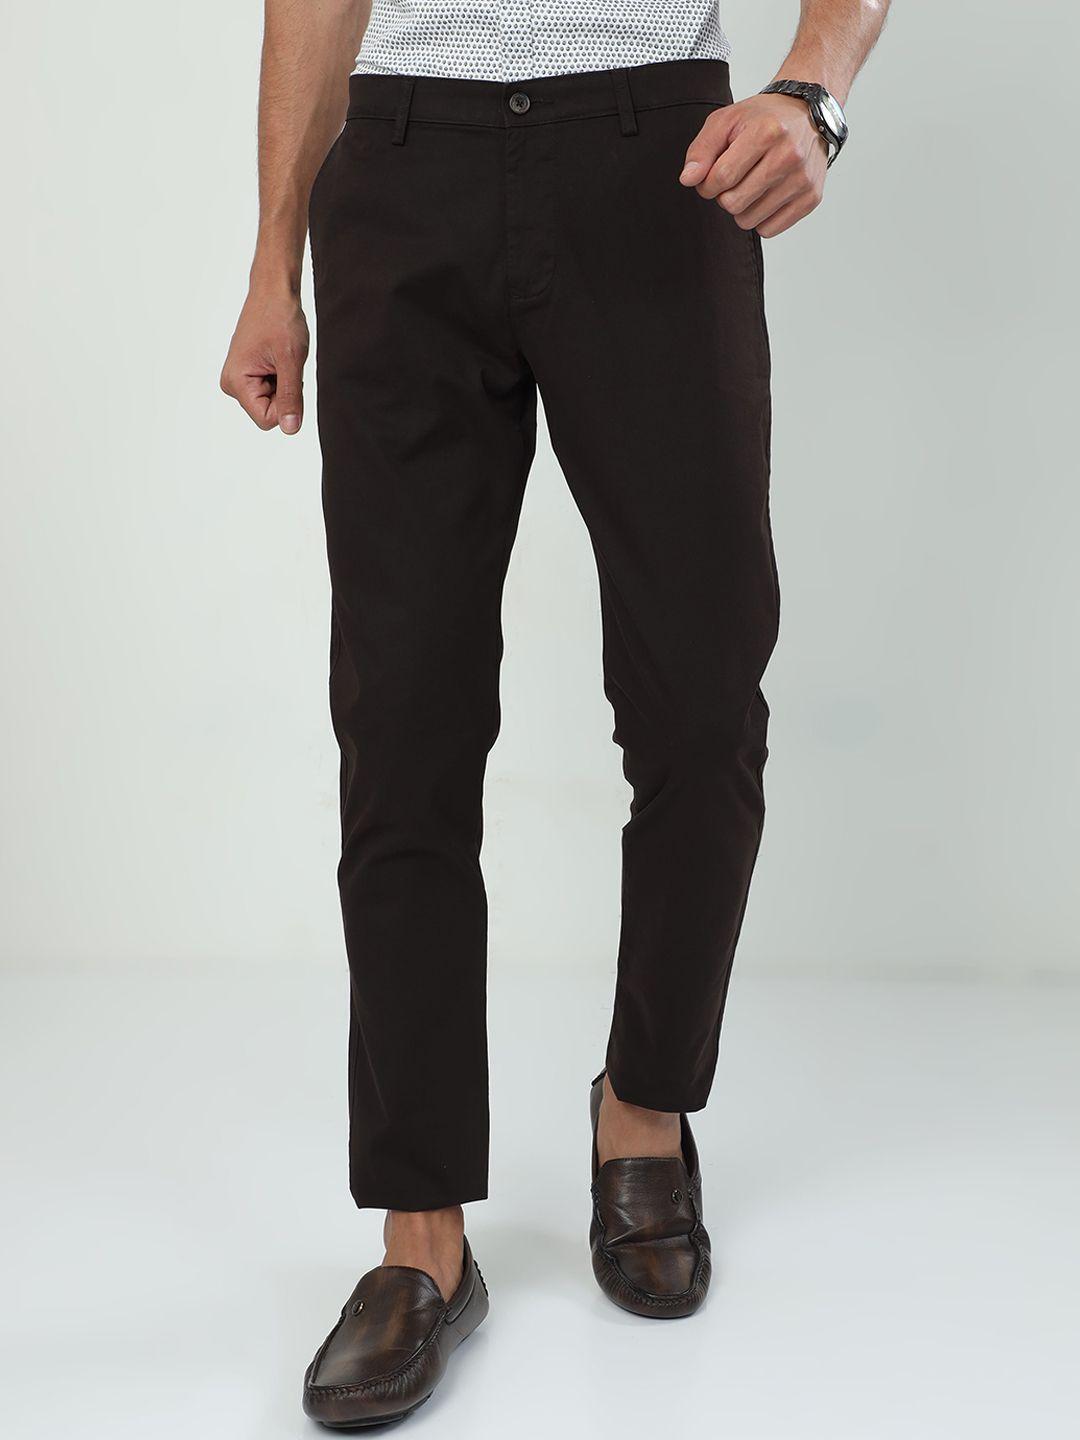 classic polo men brown trousers